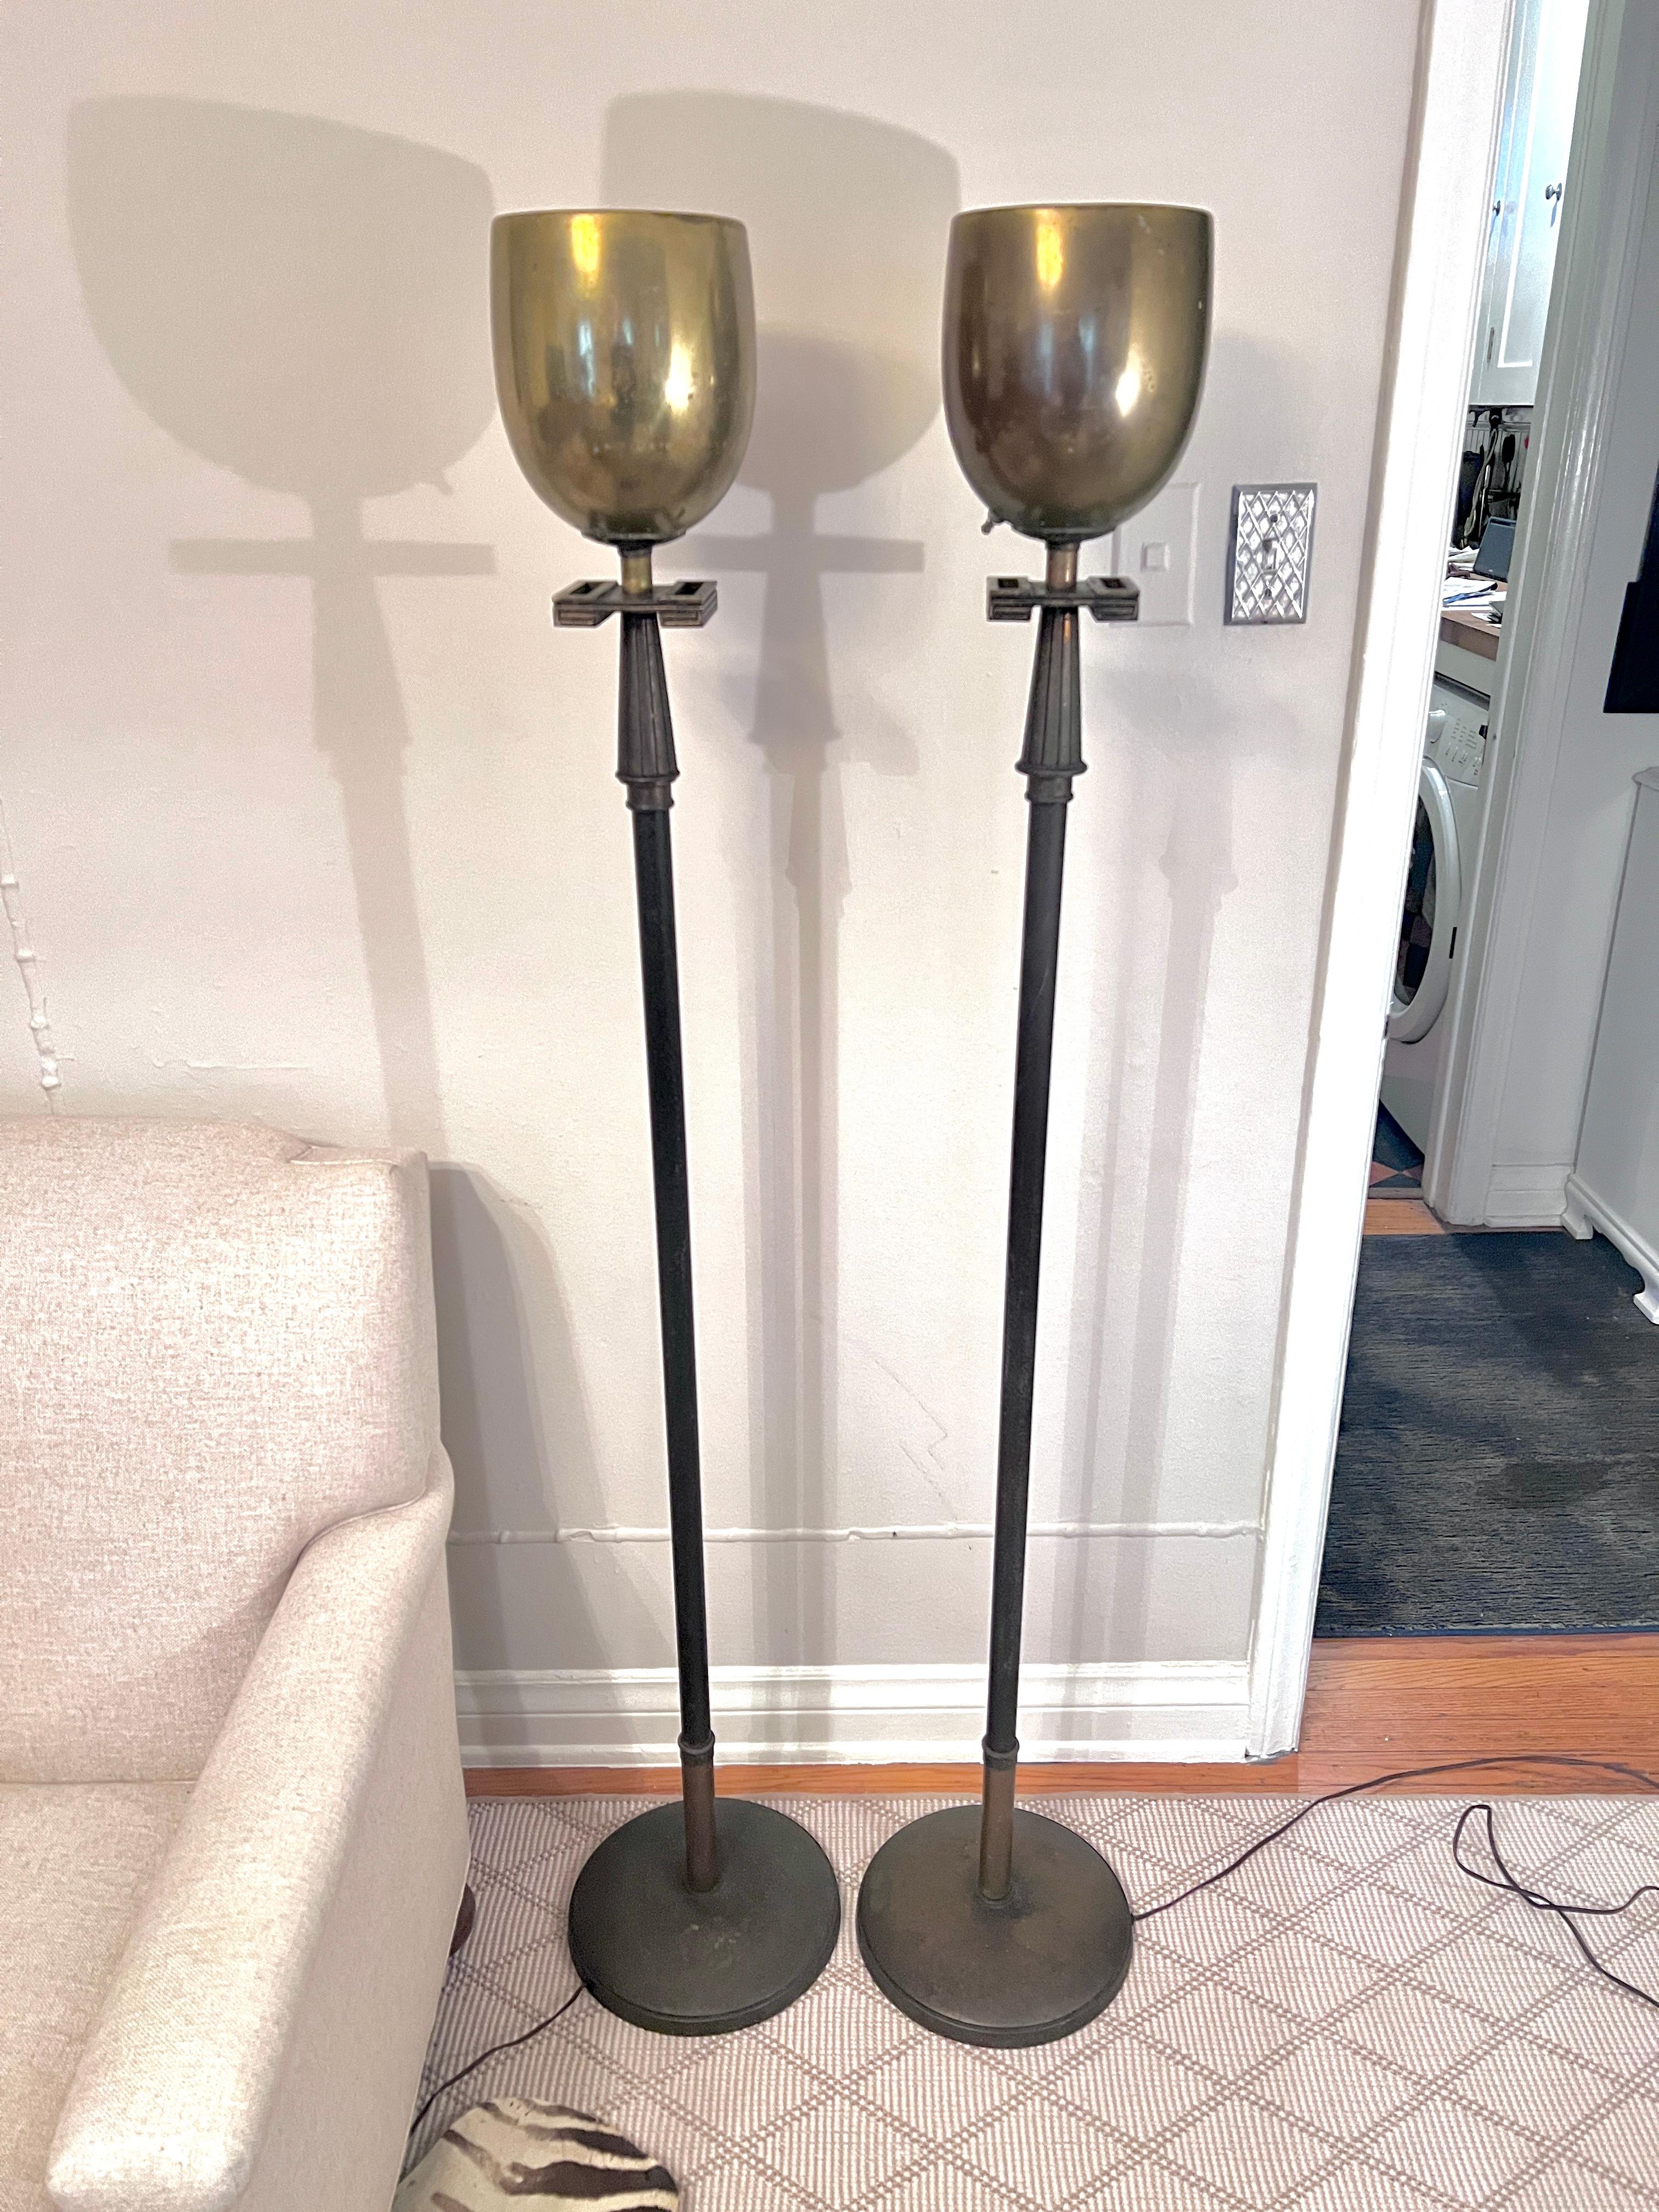 A pair of Mid Century Brass Torchieres by Iconic Designer, Tommi Parzinger.  The pair are great design and look great flanking a doorway, or spaced about in a room.  Perfect for most any room, from Master Bedroom - Living room.

The lamps have a